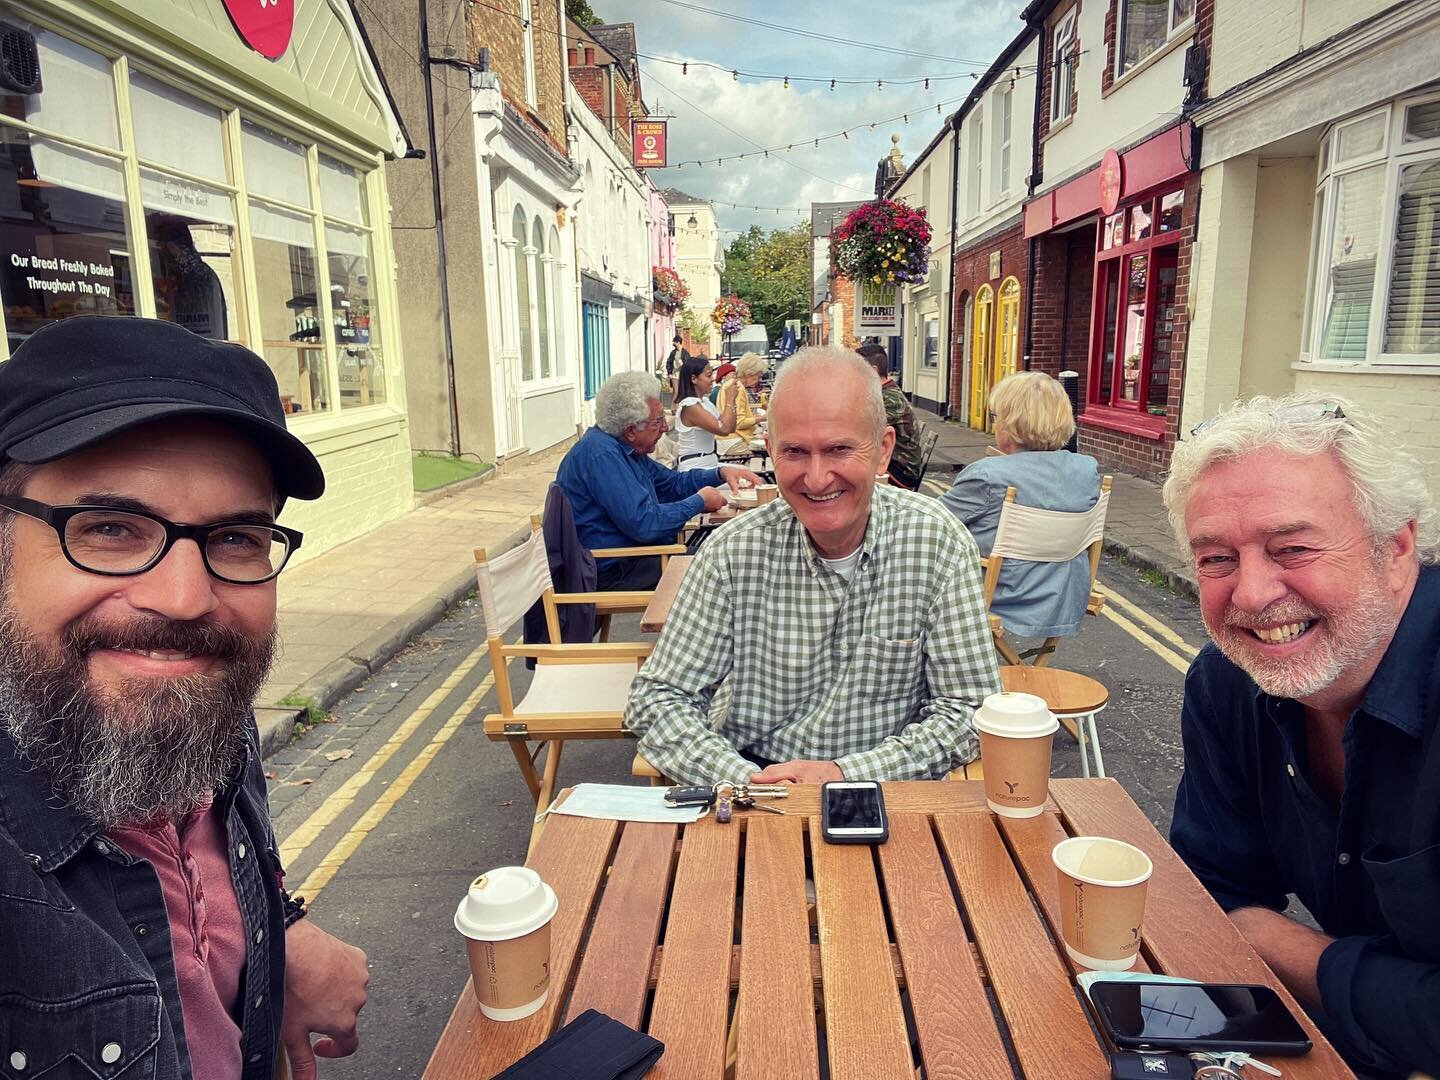 🇬🇧 photo dump 3/3

Cultivating old and new friendships throughout Michaelmas term

1) The legends @jdavidclifton and Andy Piercy

2) @itsryanwhitaker filmed a film (@surprisedbyoxford)

3) Simon Ponsonby and the wonderful @staldatesoxford family

4